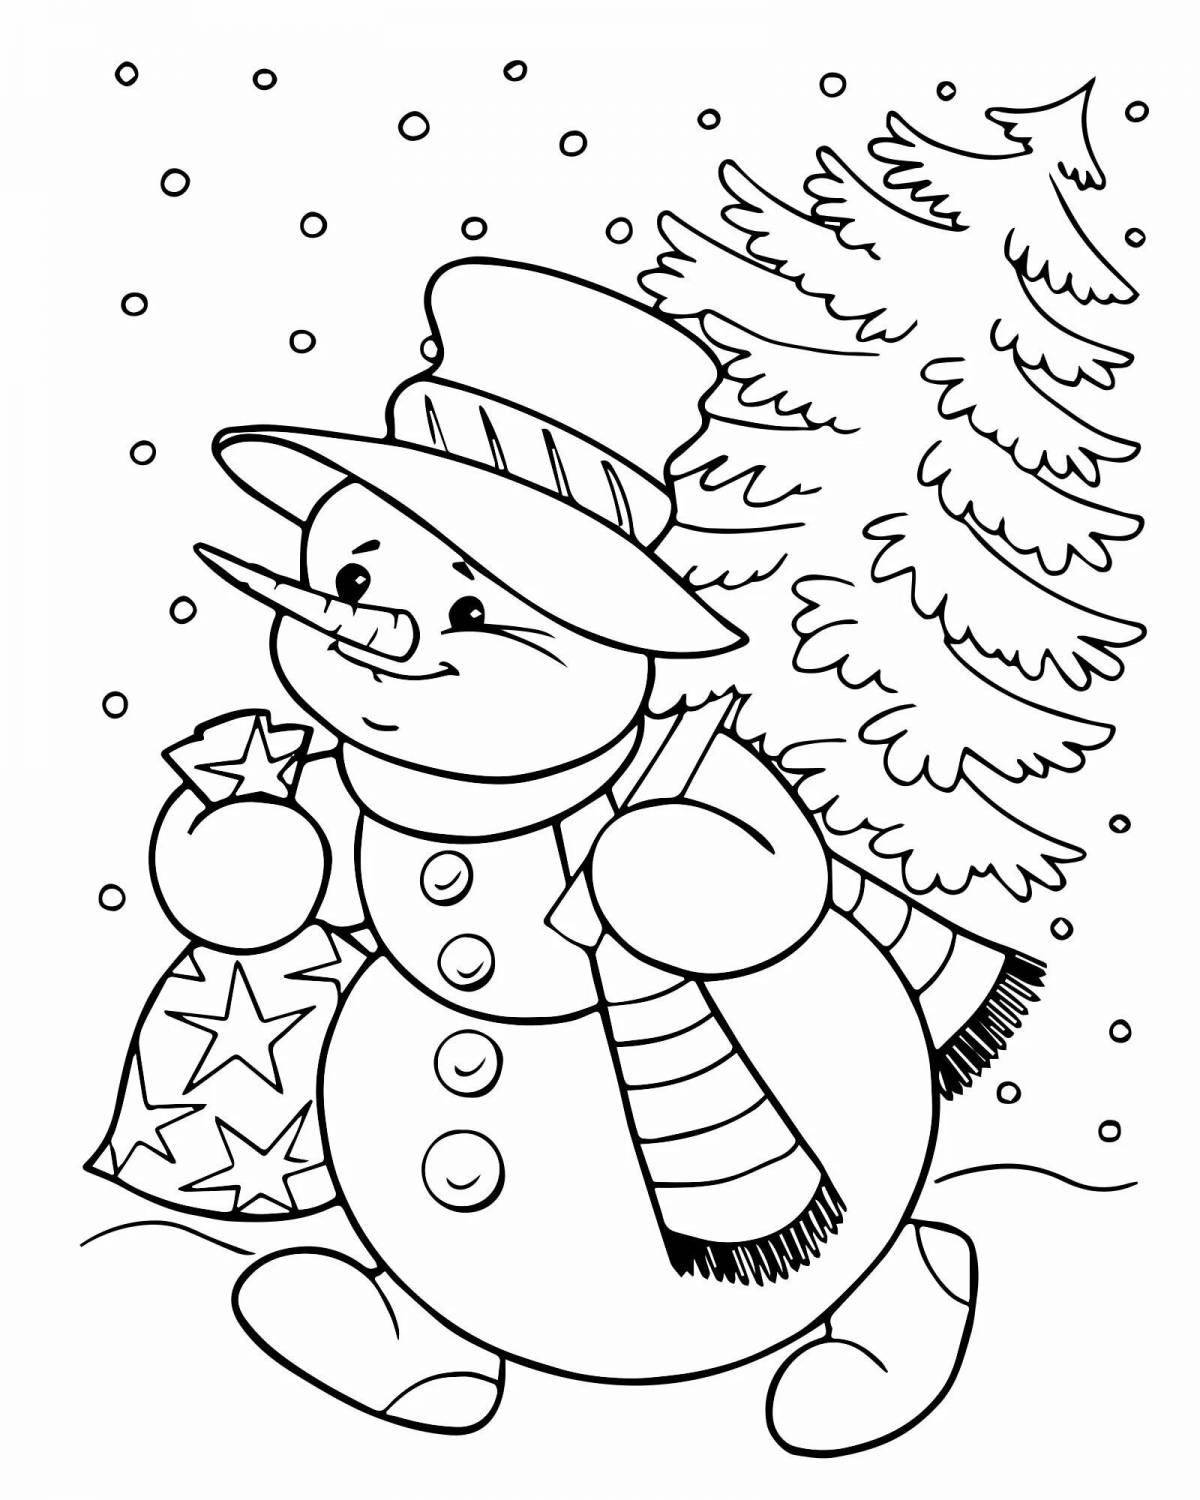 Bright drawing of a snowman for children